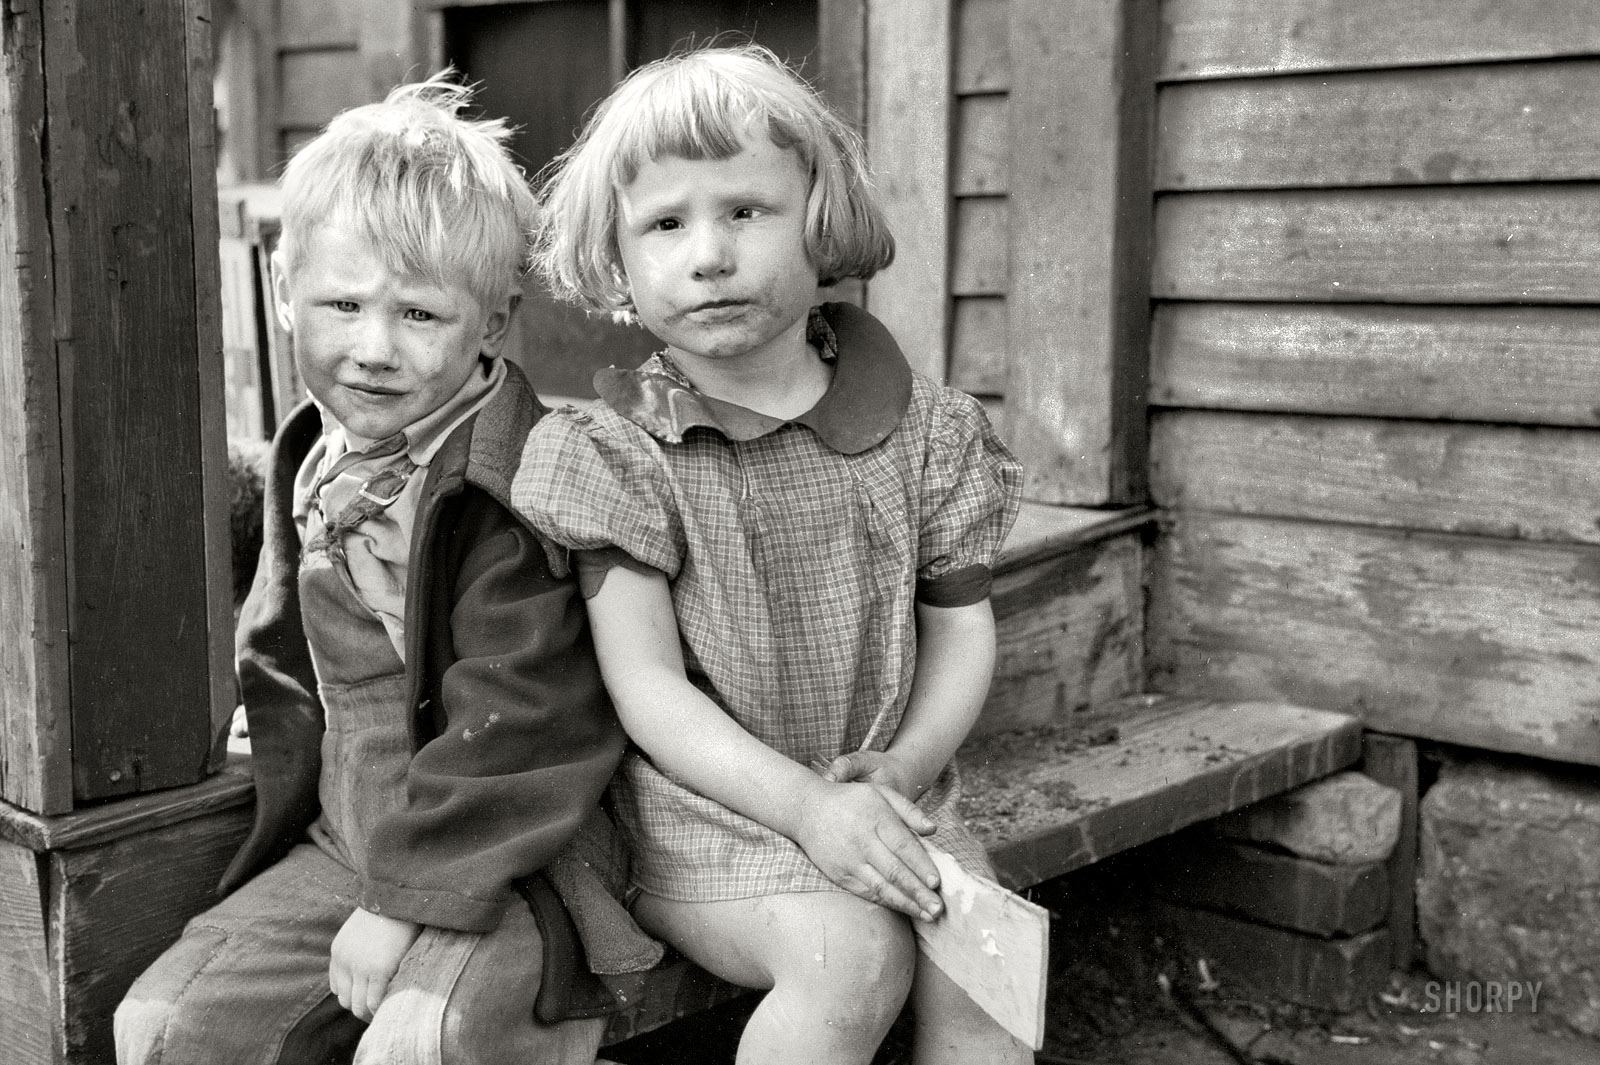 April 1940. Dubuque, Iowa. "Children who live in the slums." 35mm nitrate negative by John Vachon for the Farm Security Administration. View full size.